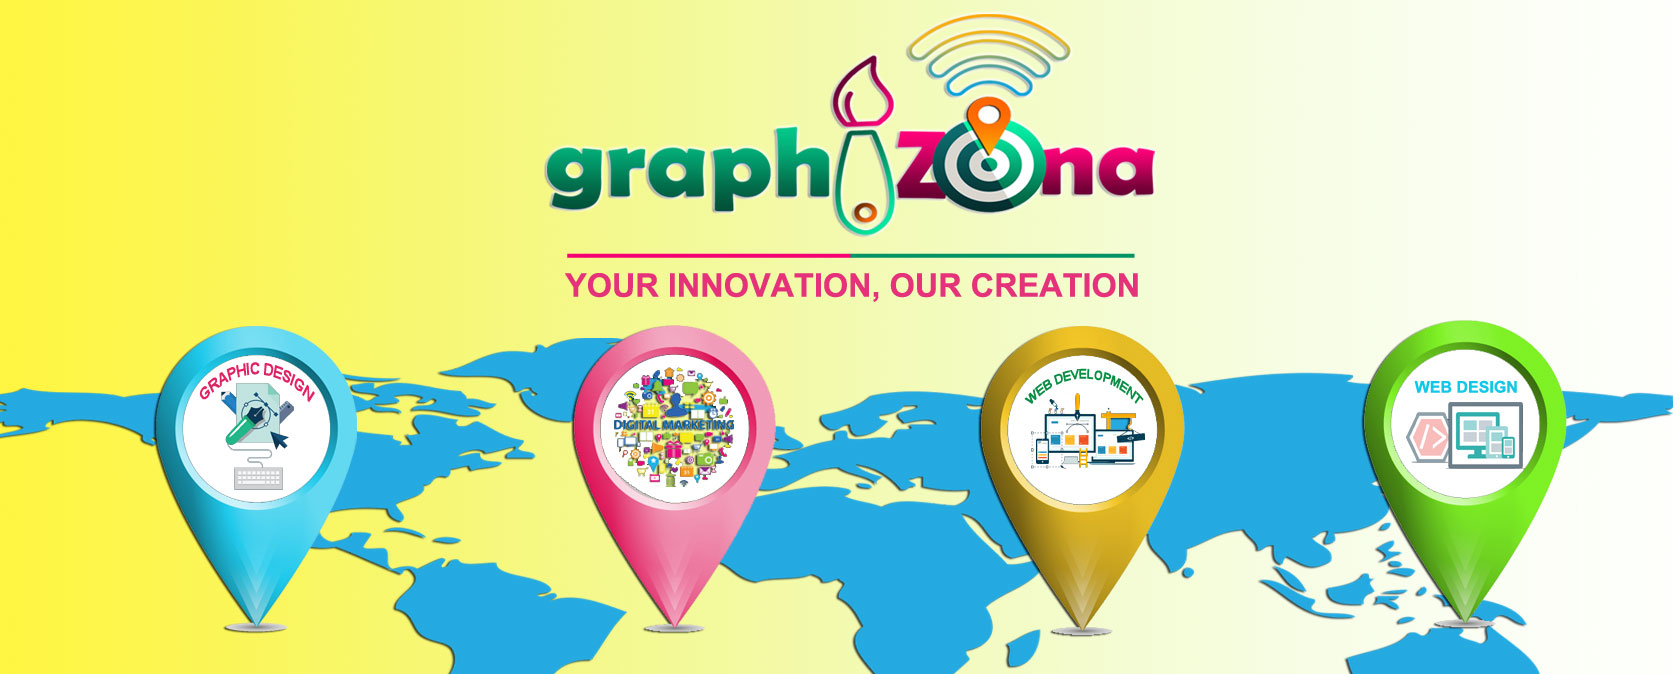 graphizona graphics and technology solutions